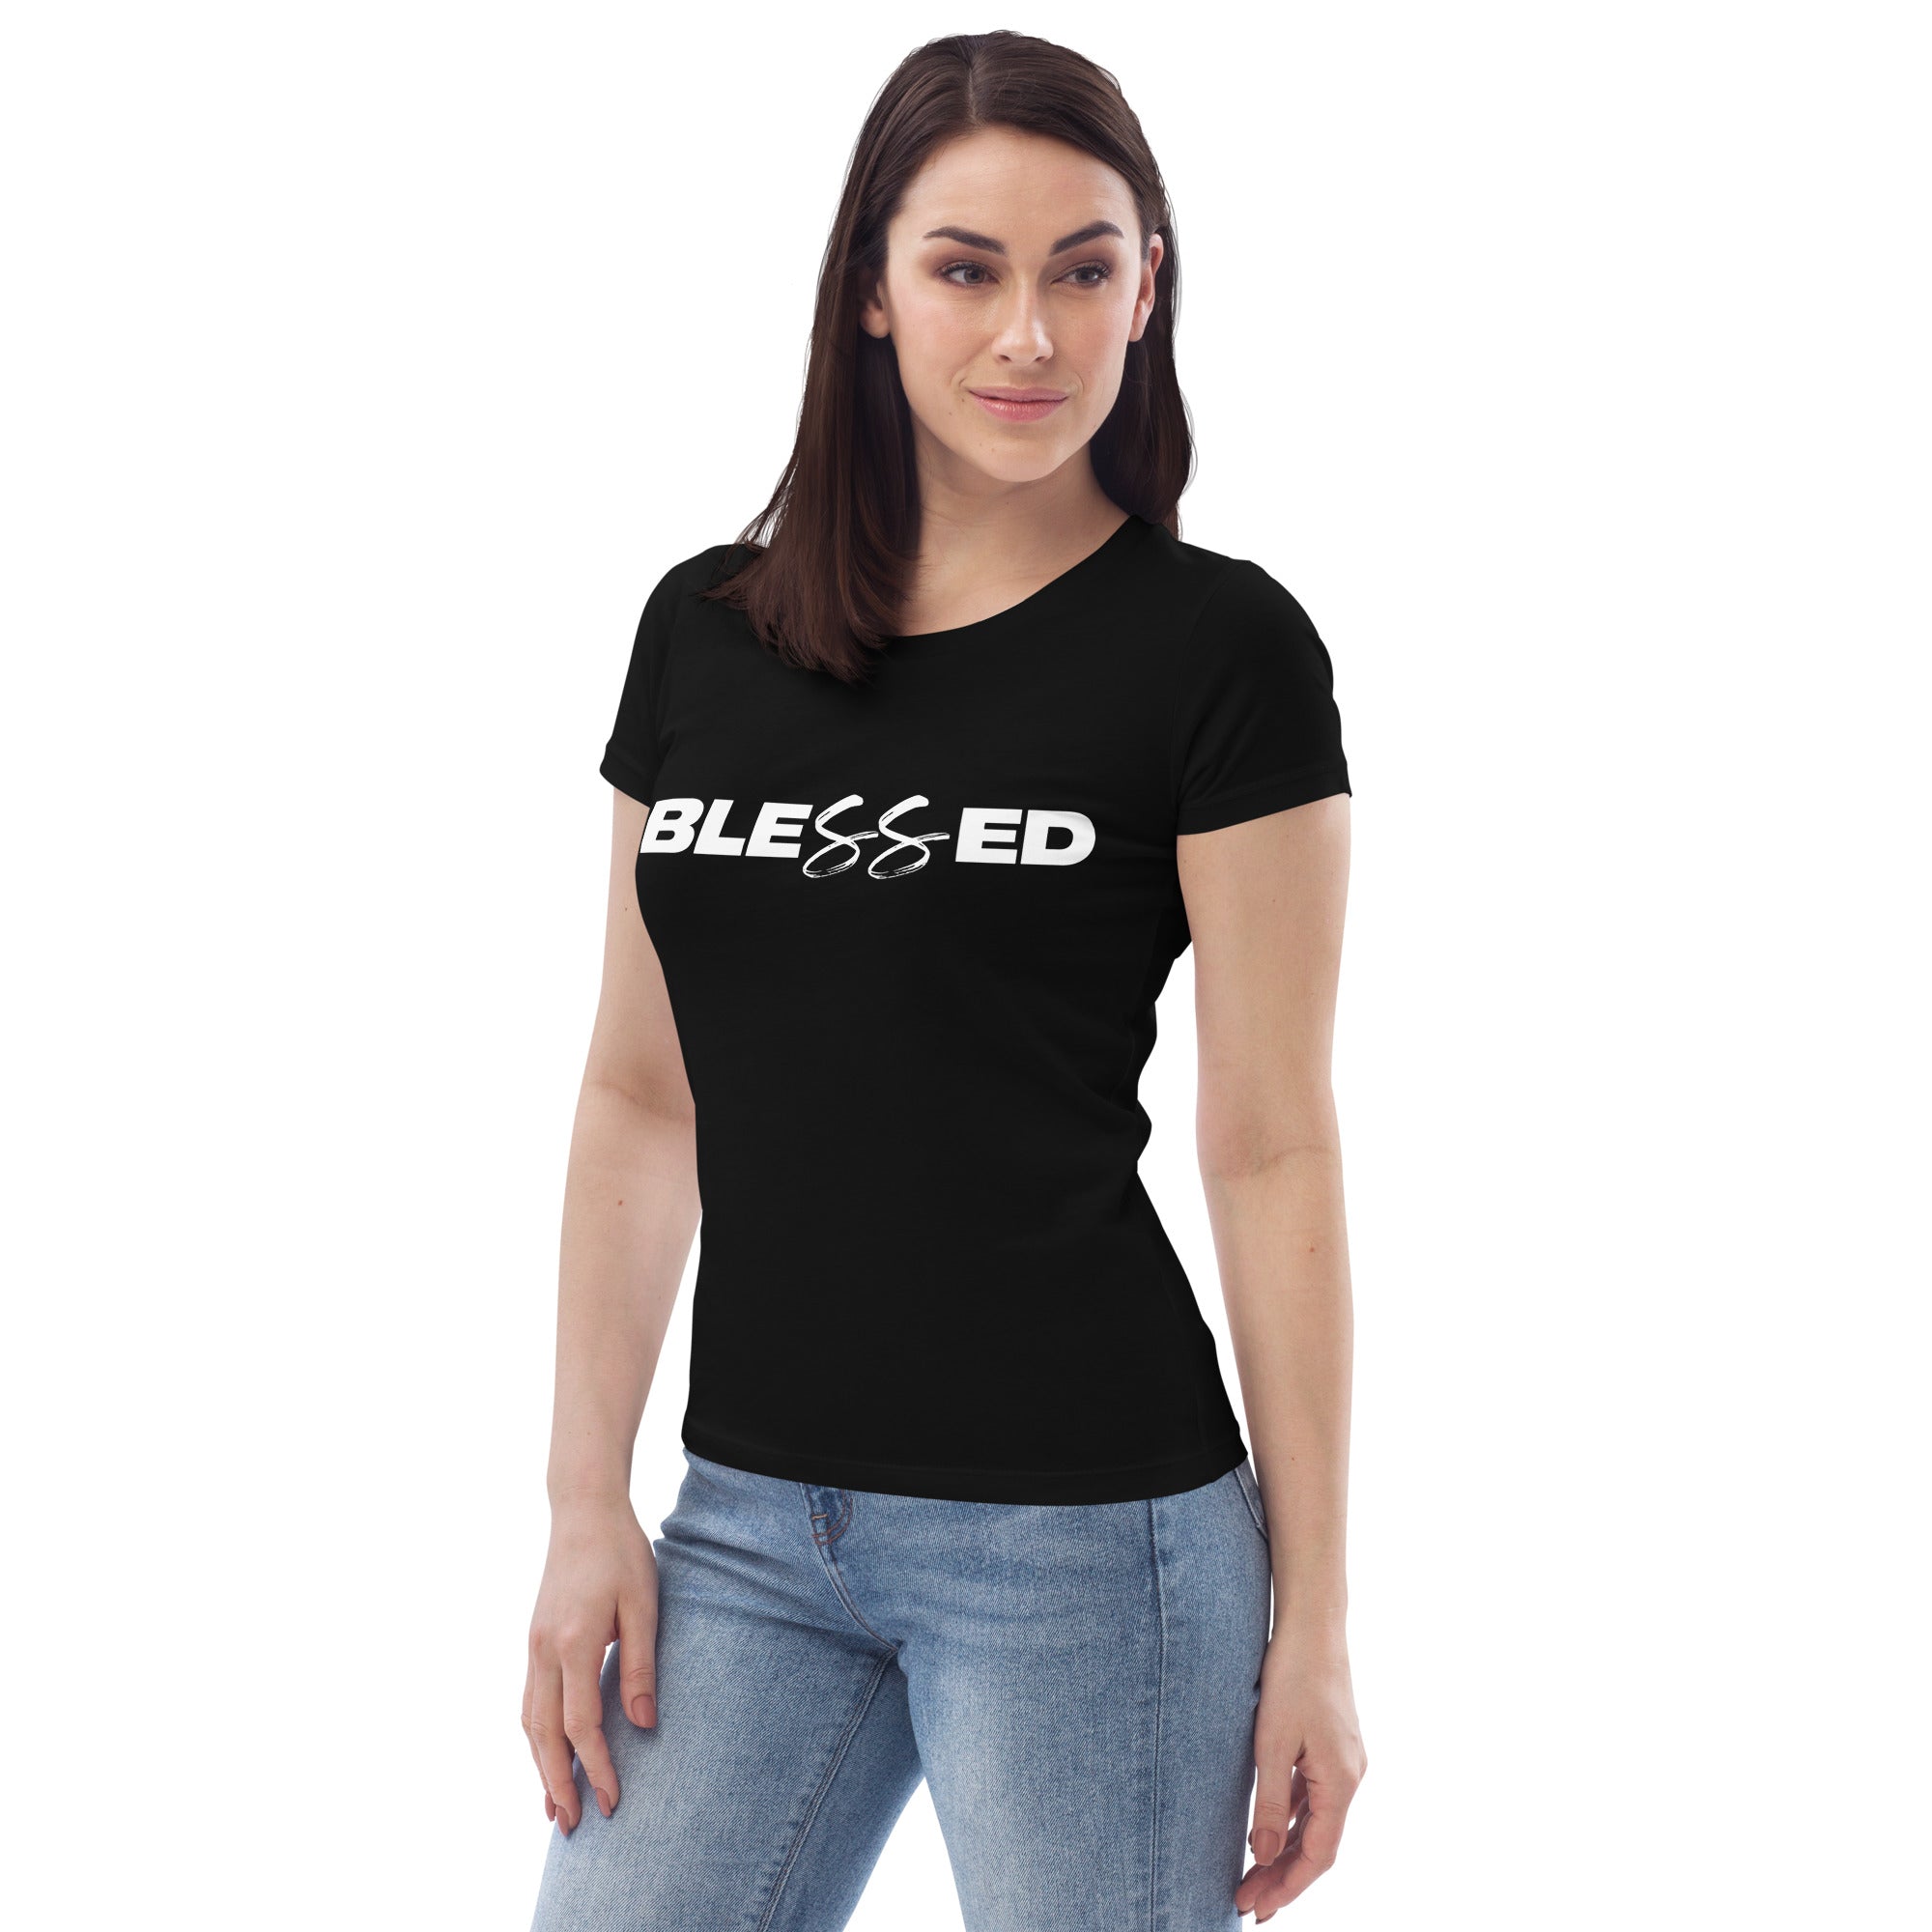 Blessed Women's Fitted eco T-Shirt